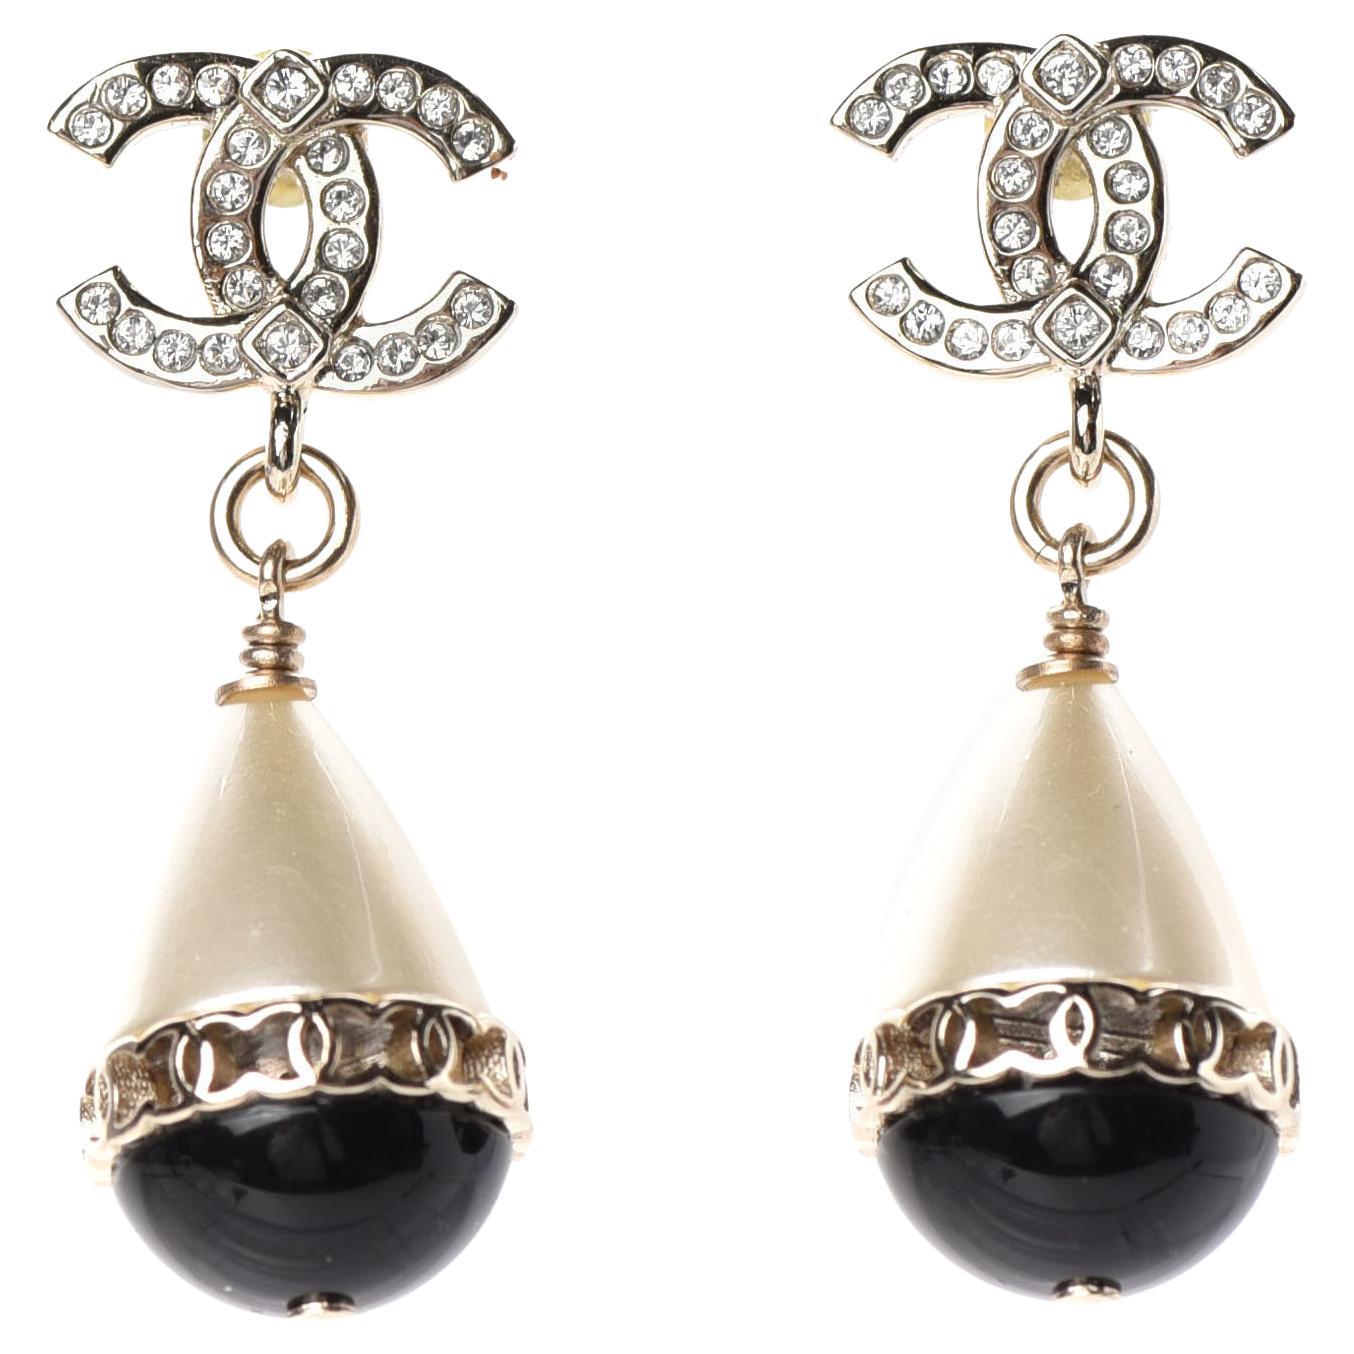 CHANEL NEW CC Gold PearlCrystal Black Accent Evening Dangle Drop Earrings in Box